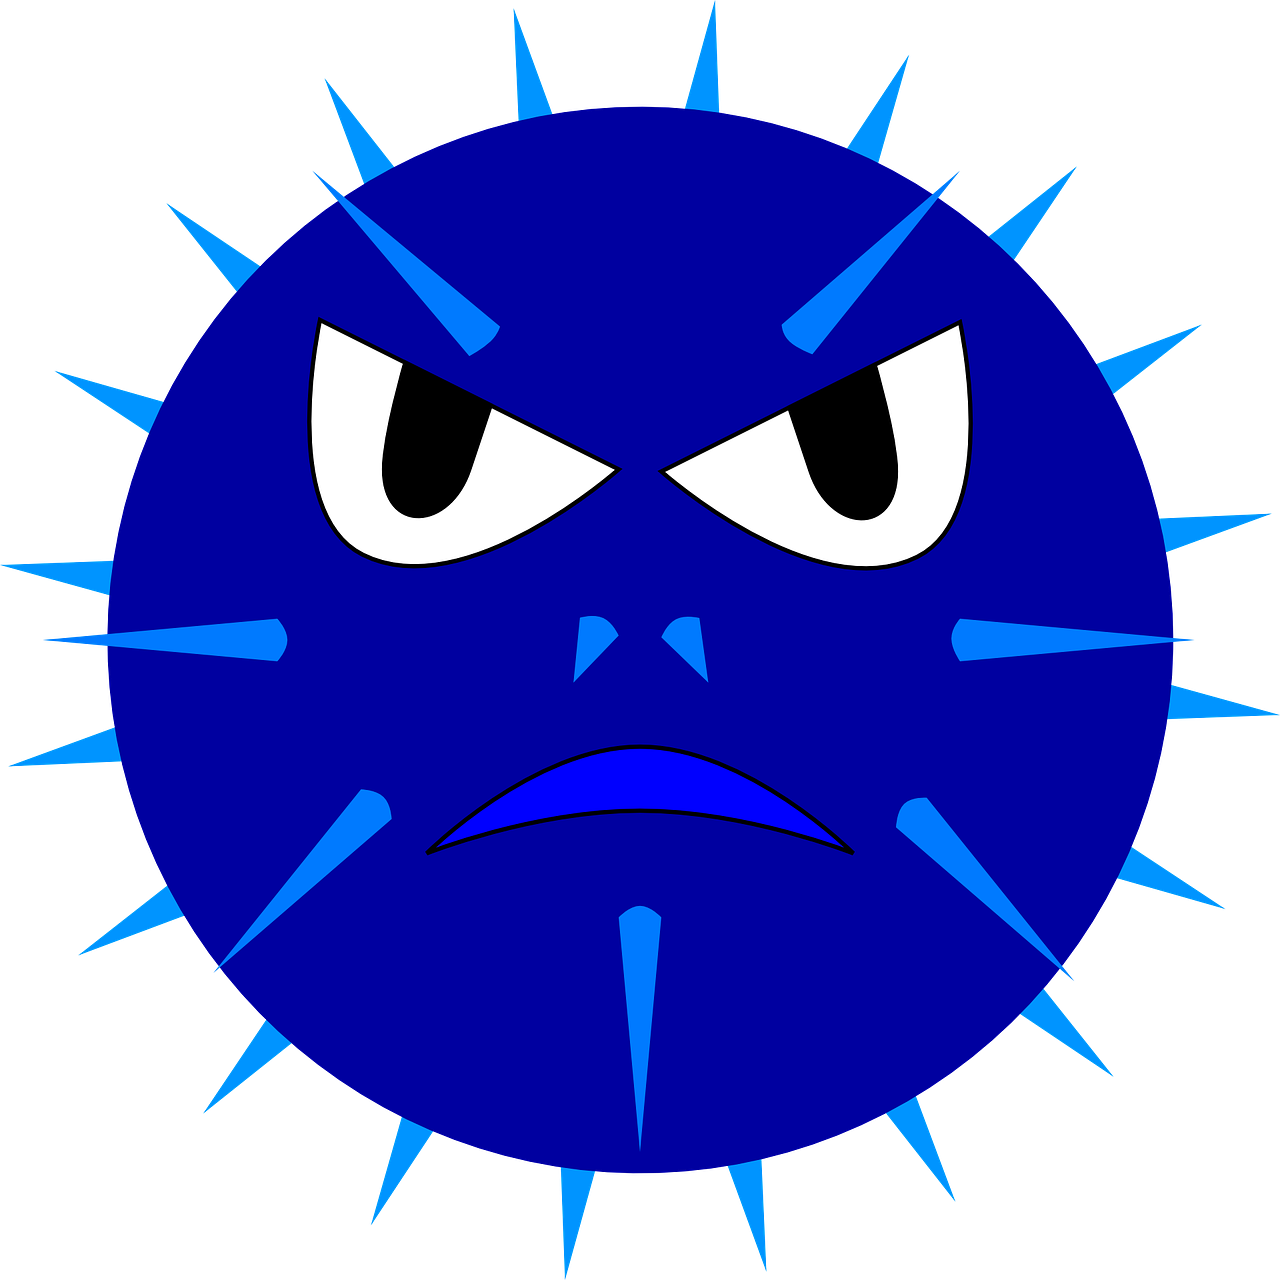 angry,mean,grumpy,thorns,anger,warning,free vector graphics,free pictures, free photos, free images, royalty free, free illustrations, public domain